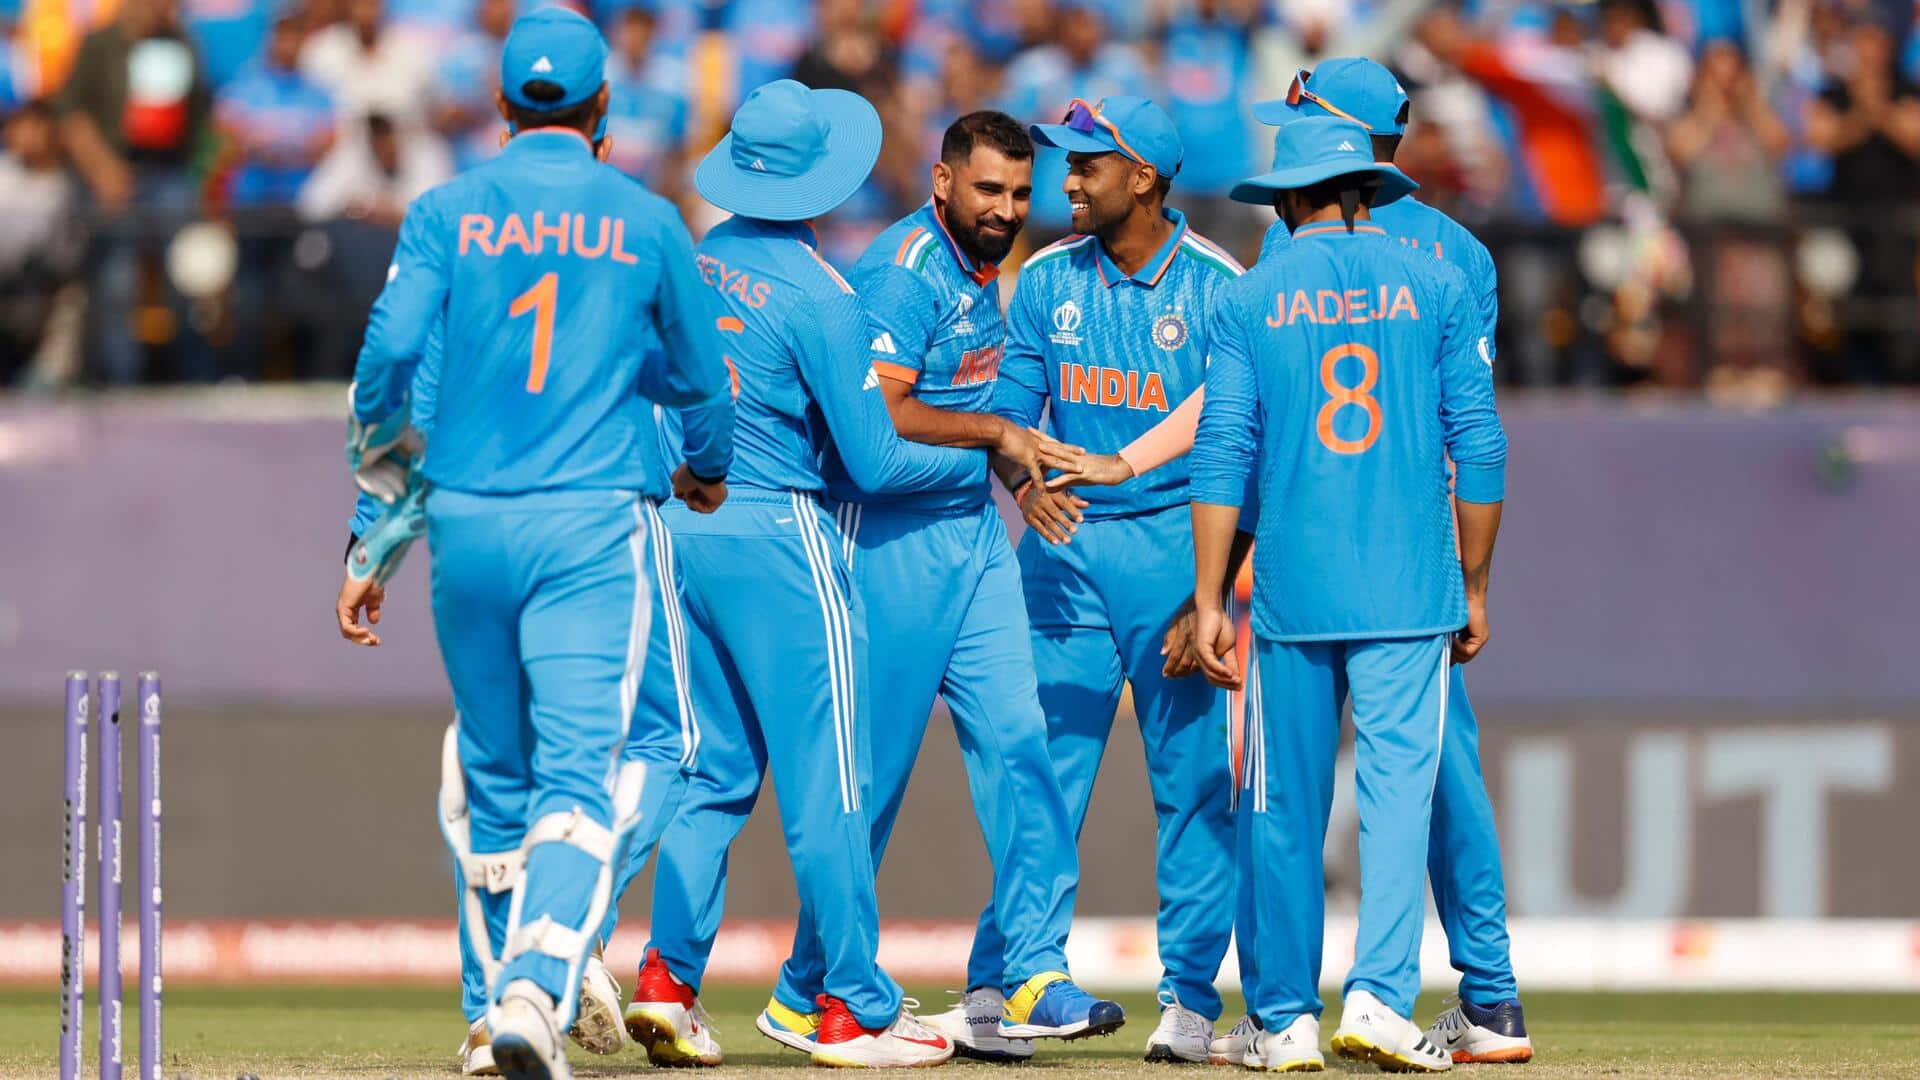 Mohammed Shami becomes India's second-highest wicket-taker in World Cups